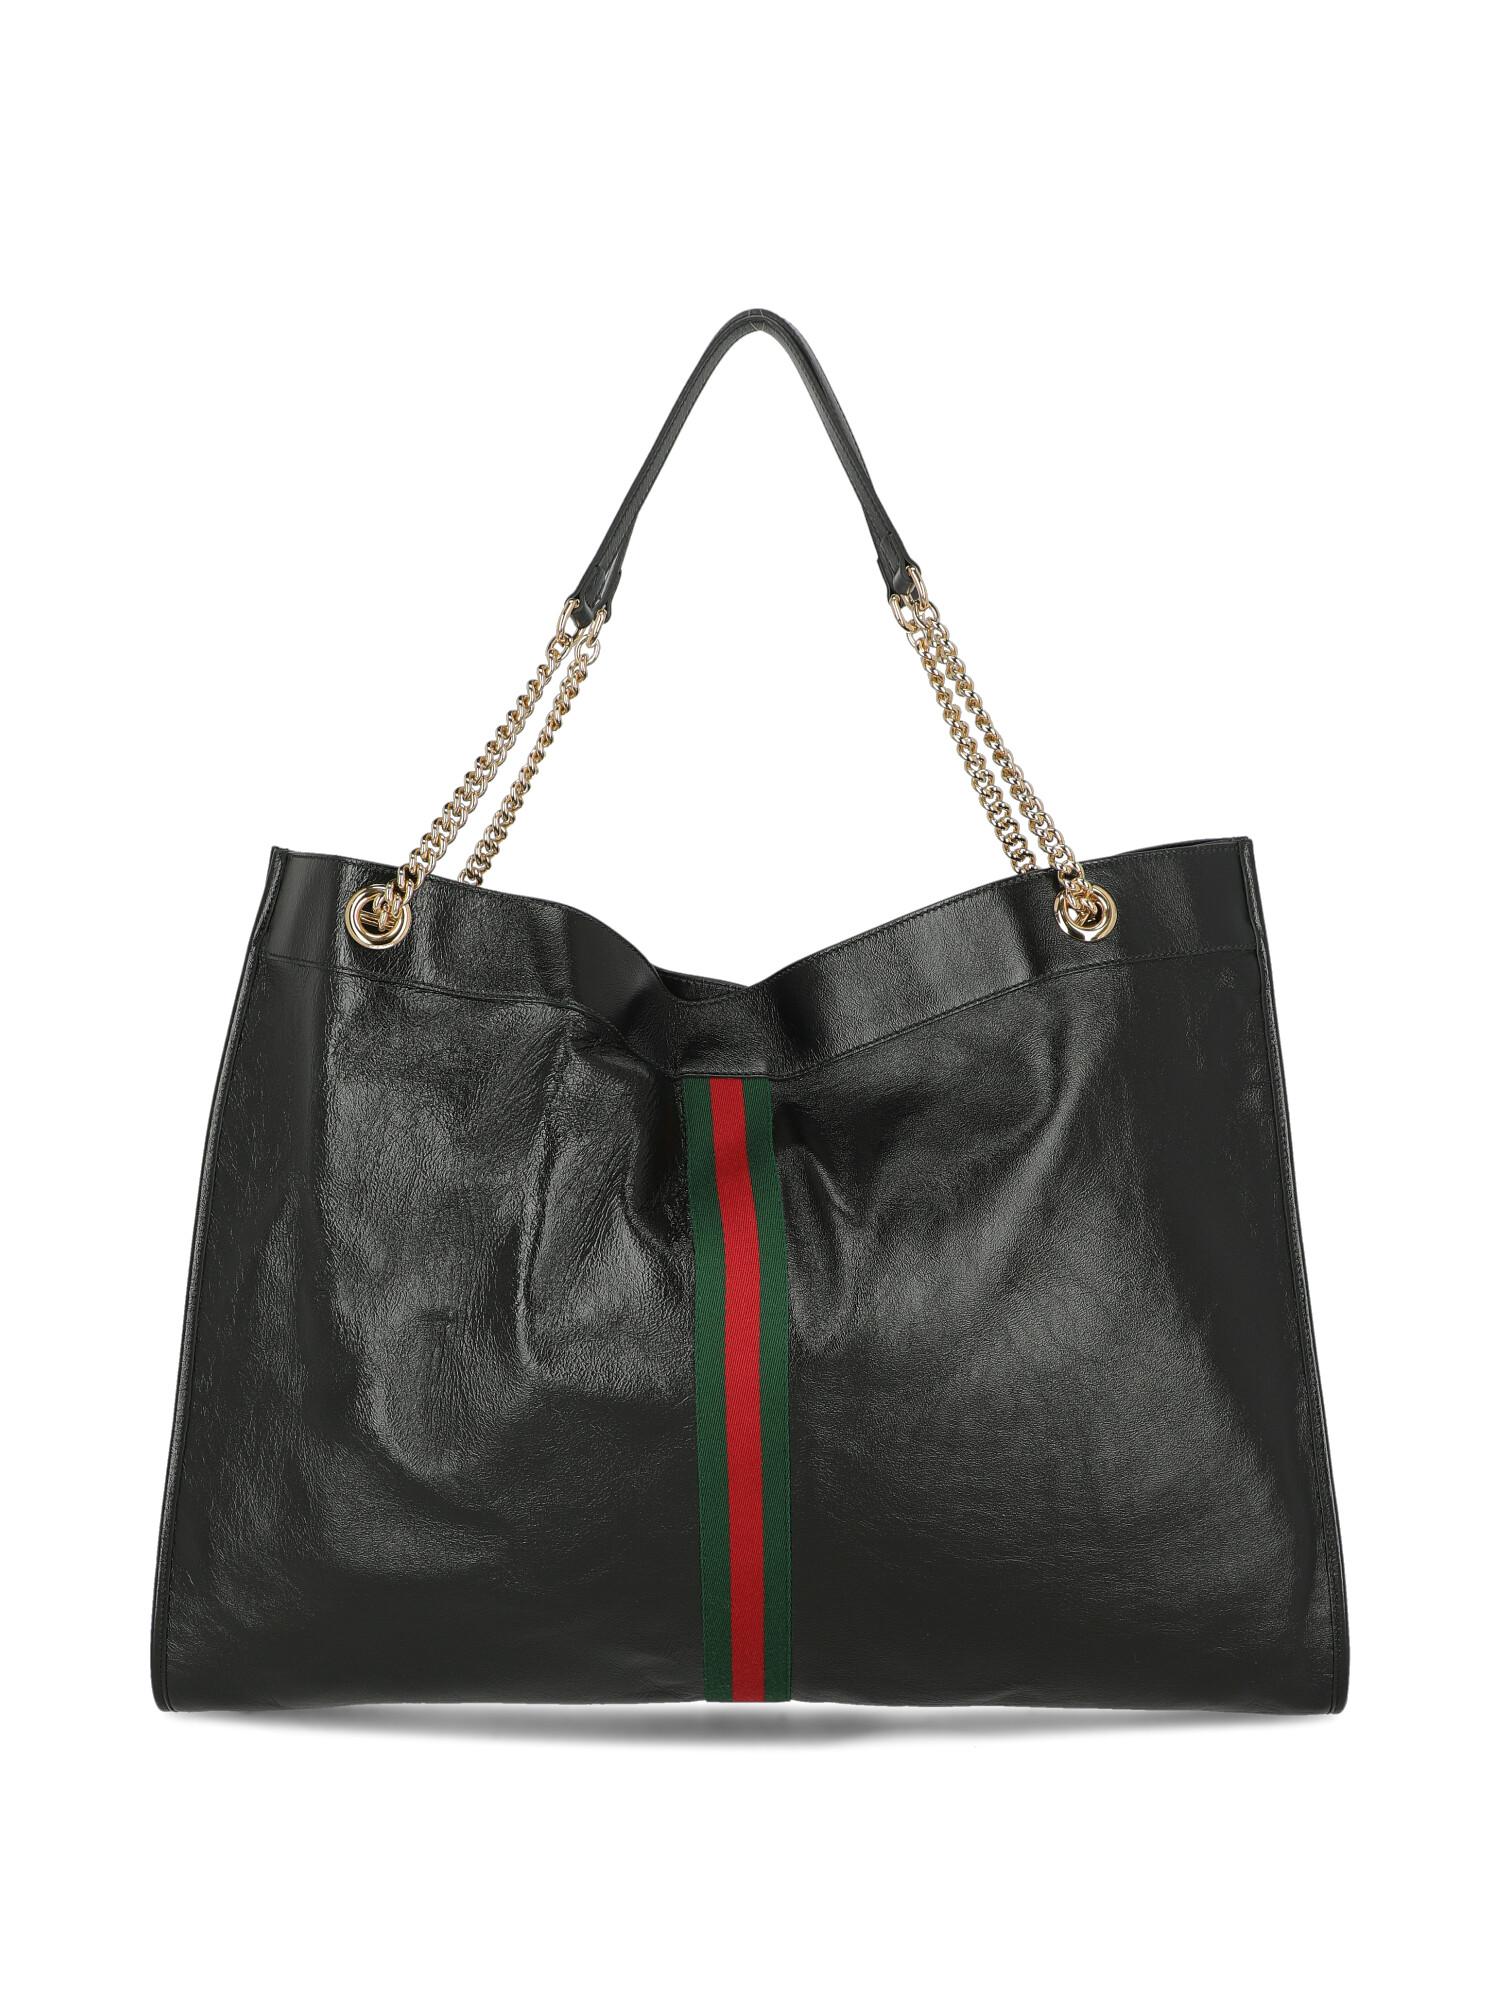 Woman, leather, solid color, iconic detail, magnetic closure, gold-tone hardware, metal application, day bag

Includes:
- Dust bag

Product Condition: Excellent
Hardware: negligible scratches.

Measurements:
Height: 42 cm
Depth: 6 cm
Width: 56